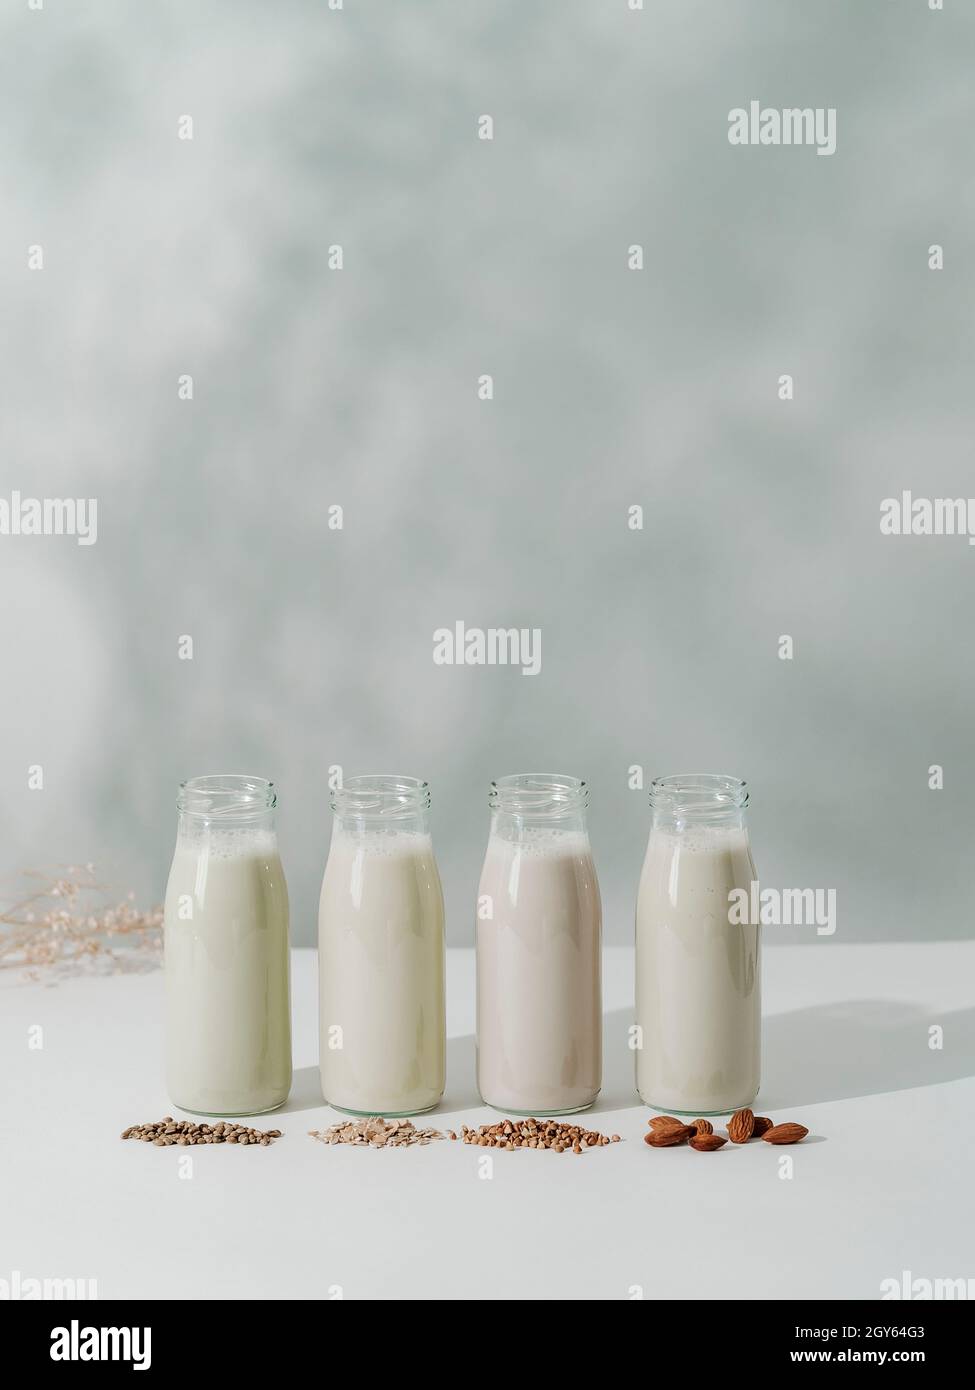 Different types non-dairy vegan milk in glass bottles on white tabletop with floral shadows on wall background. Hemp seeds, oat, buckwheat, almond mil Stock Photo